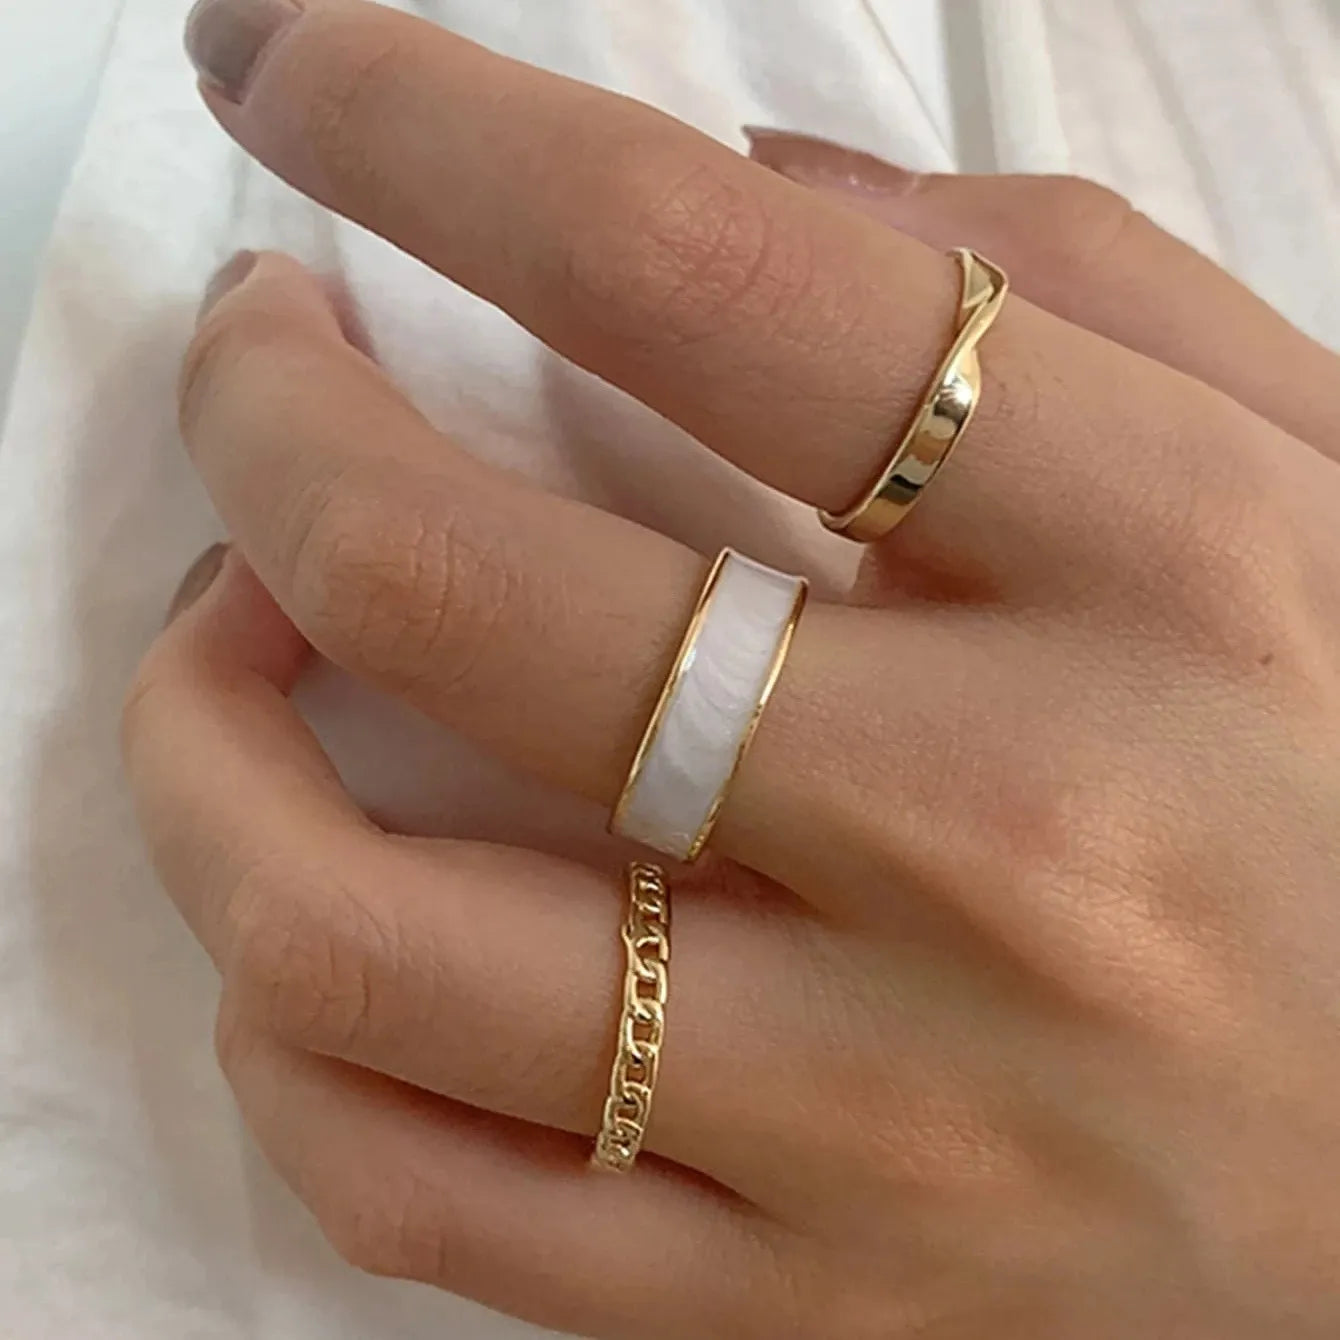 Trendy Adustable Fashion Rings in White or Green